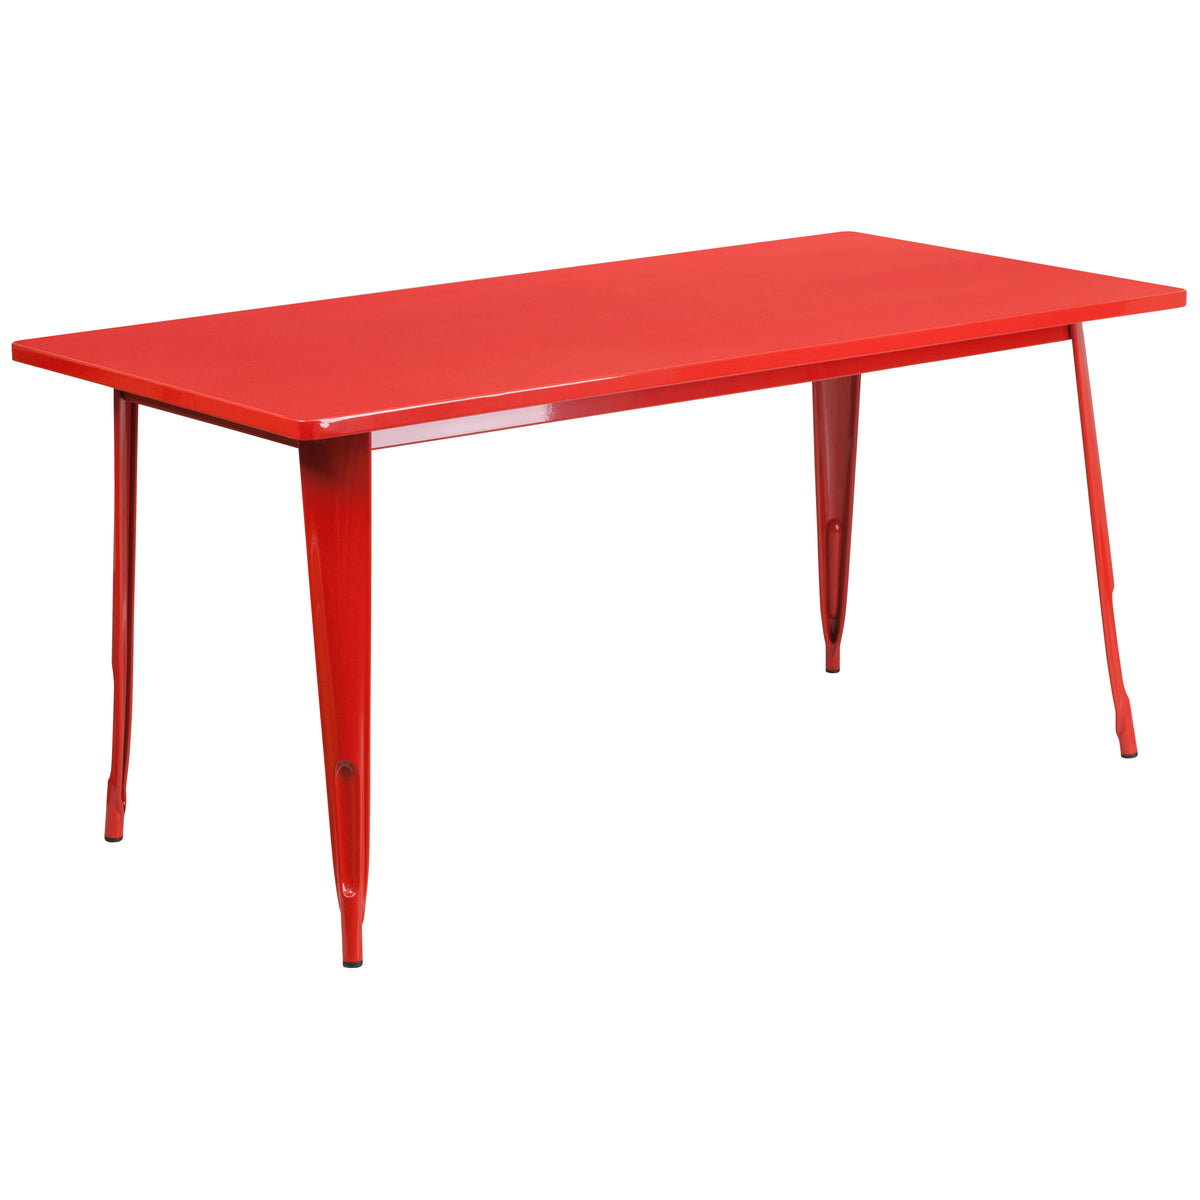 Red |#| 31.5inch x 63inch Rectangular Red Metal Indoor-Outdoor Table Set with 6 Arm Chairs